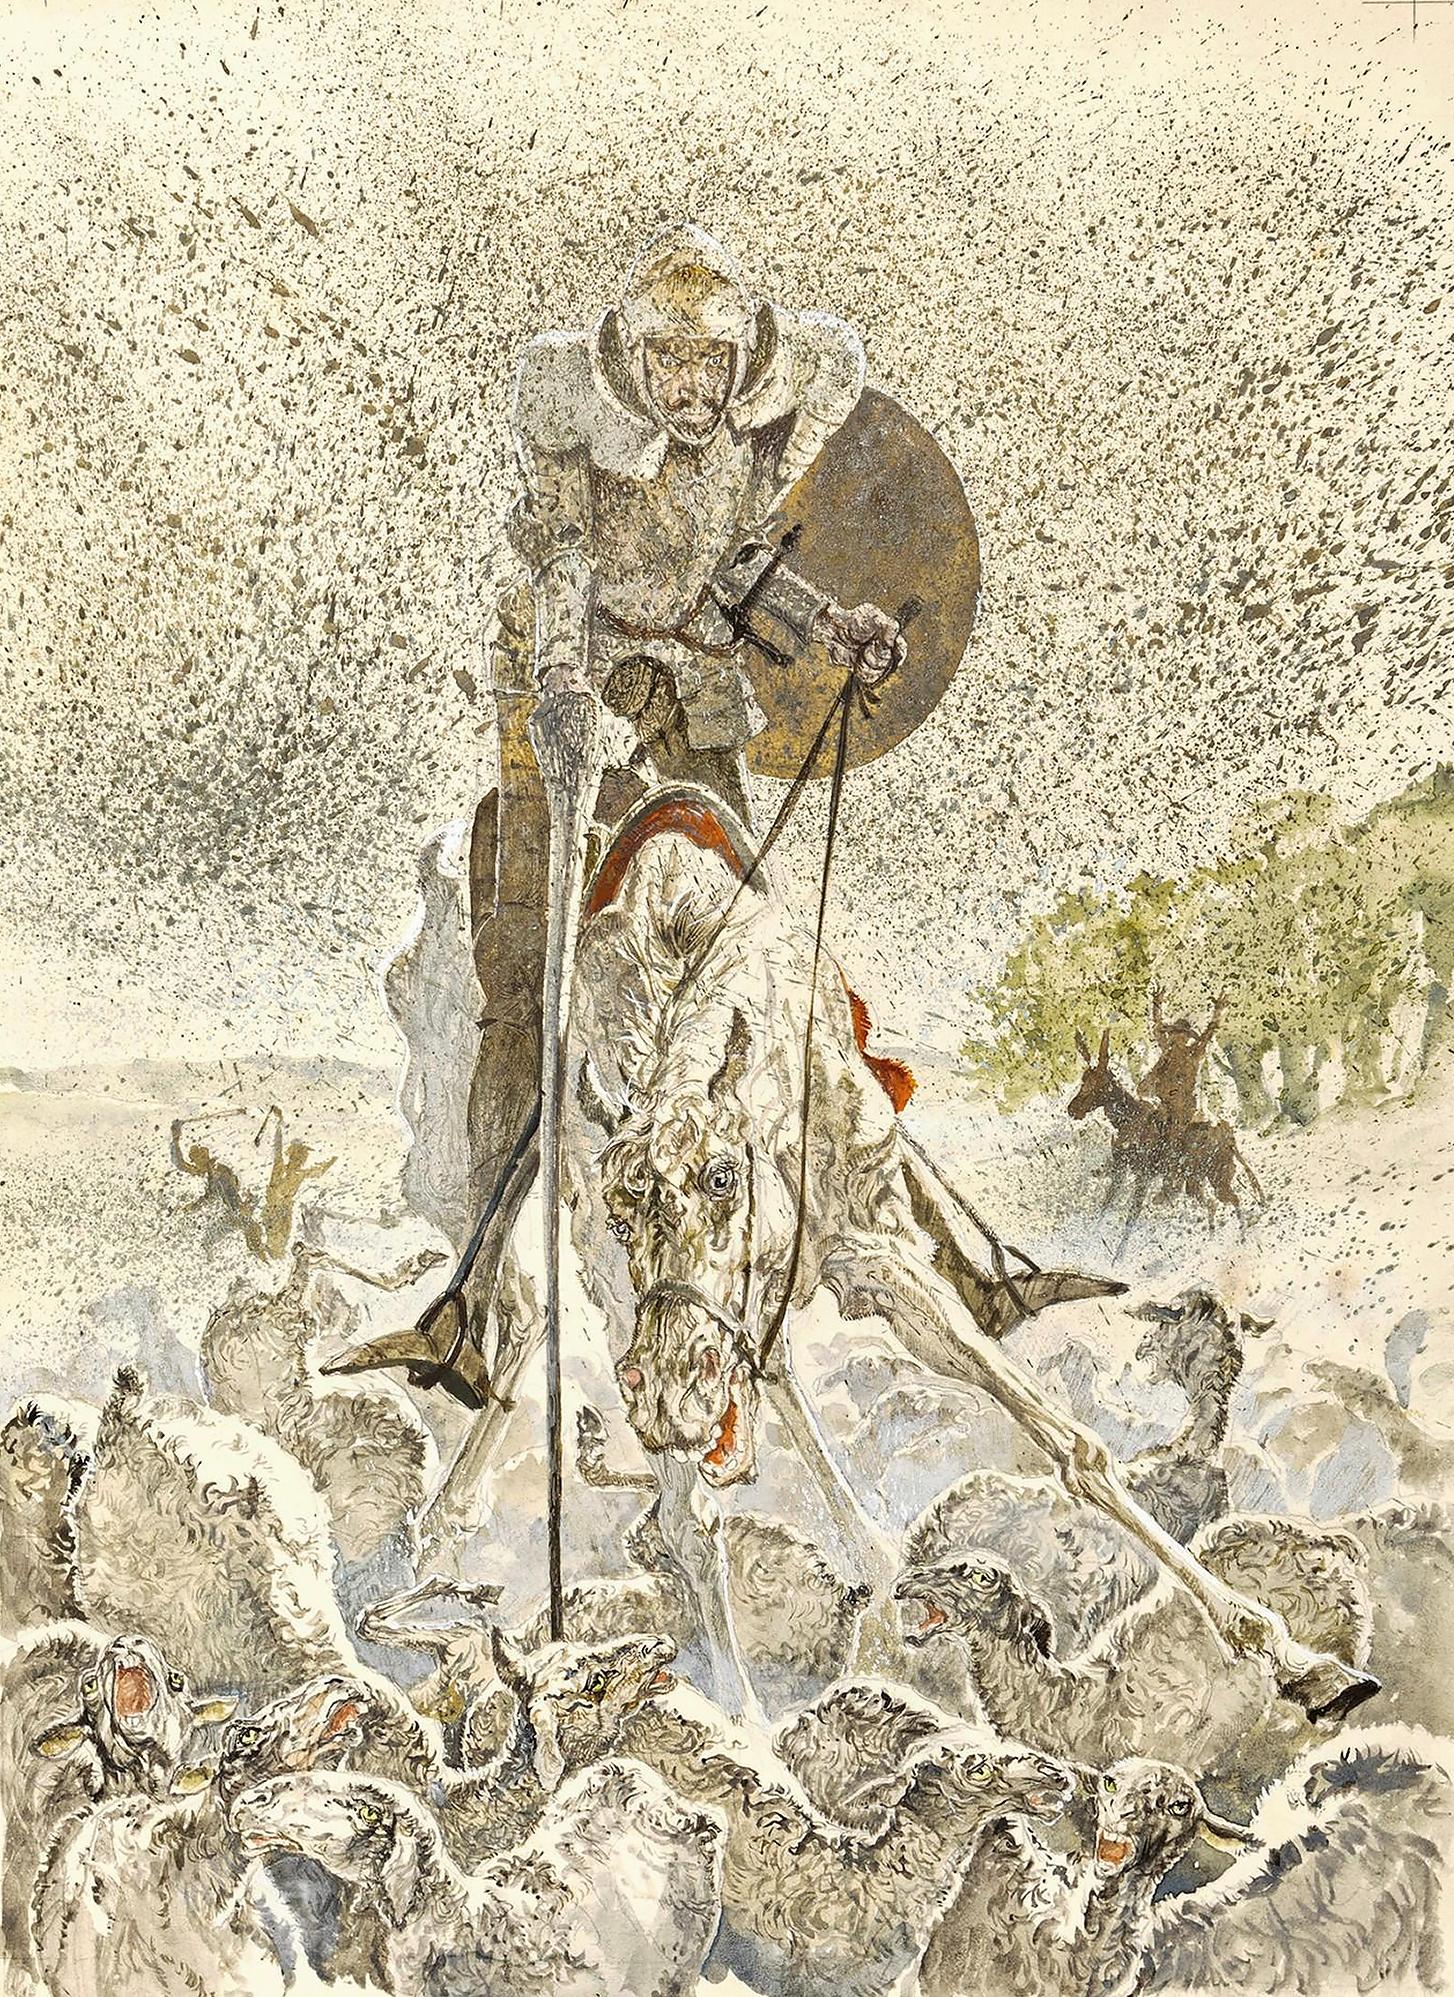 Gianni Benvenuti Animal Painting - Don Quixote -  Nobleman on Horse with Sheep  - Action Painting 